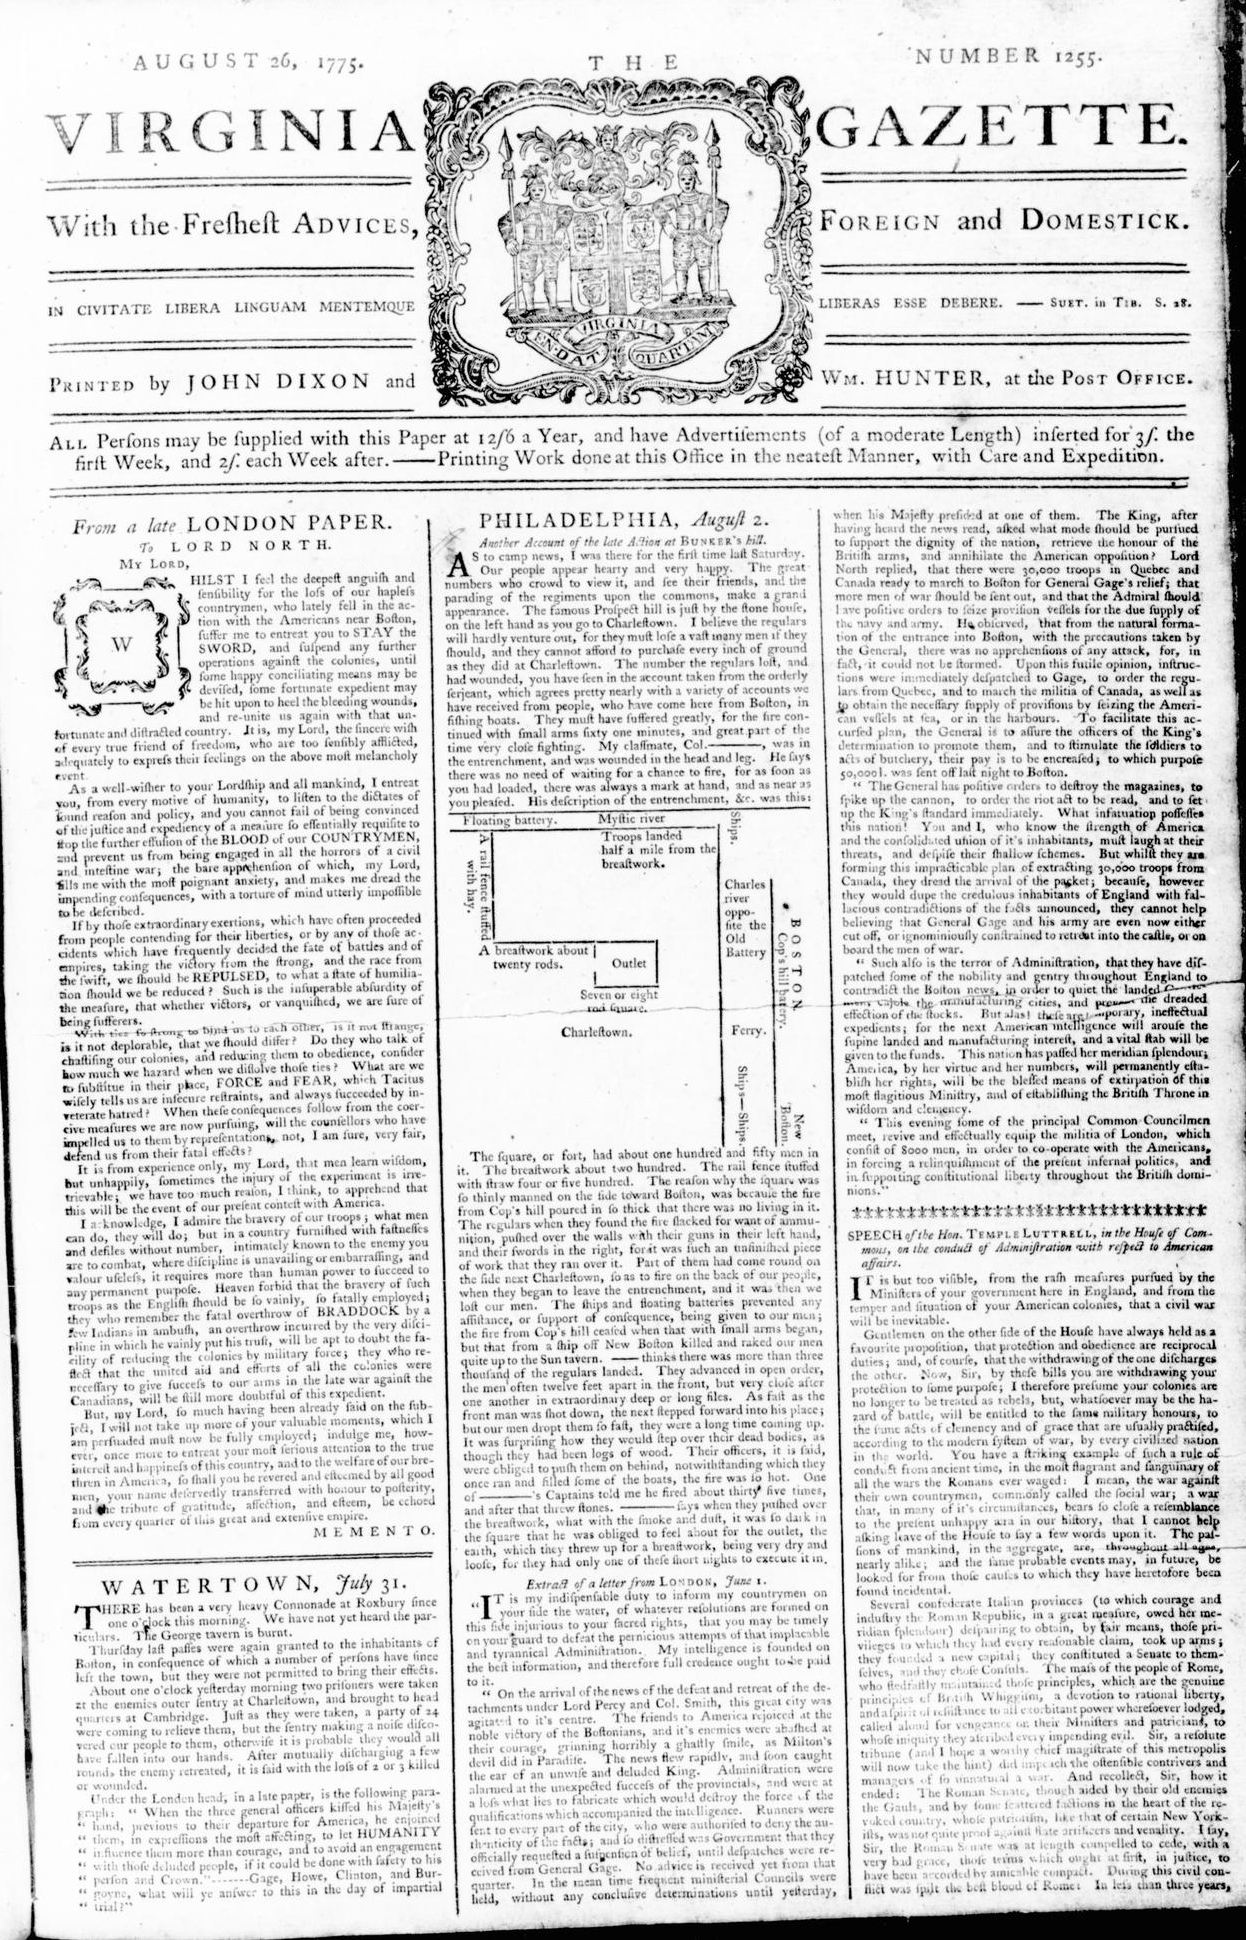 Eyewitness-Account-and-Map-of-the-Battle-of-Bunker-Hill-Virginia-Gazette-August-26-1775